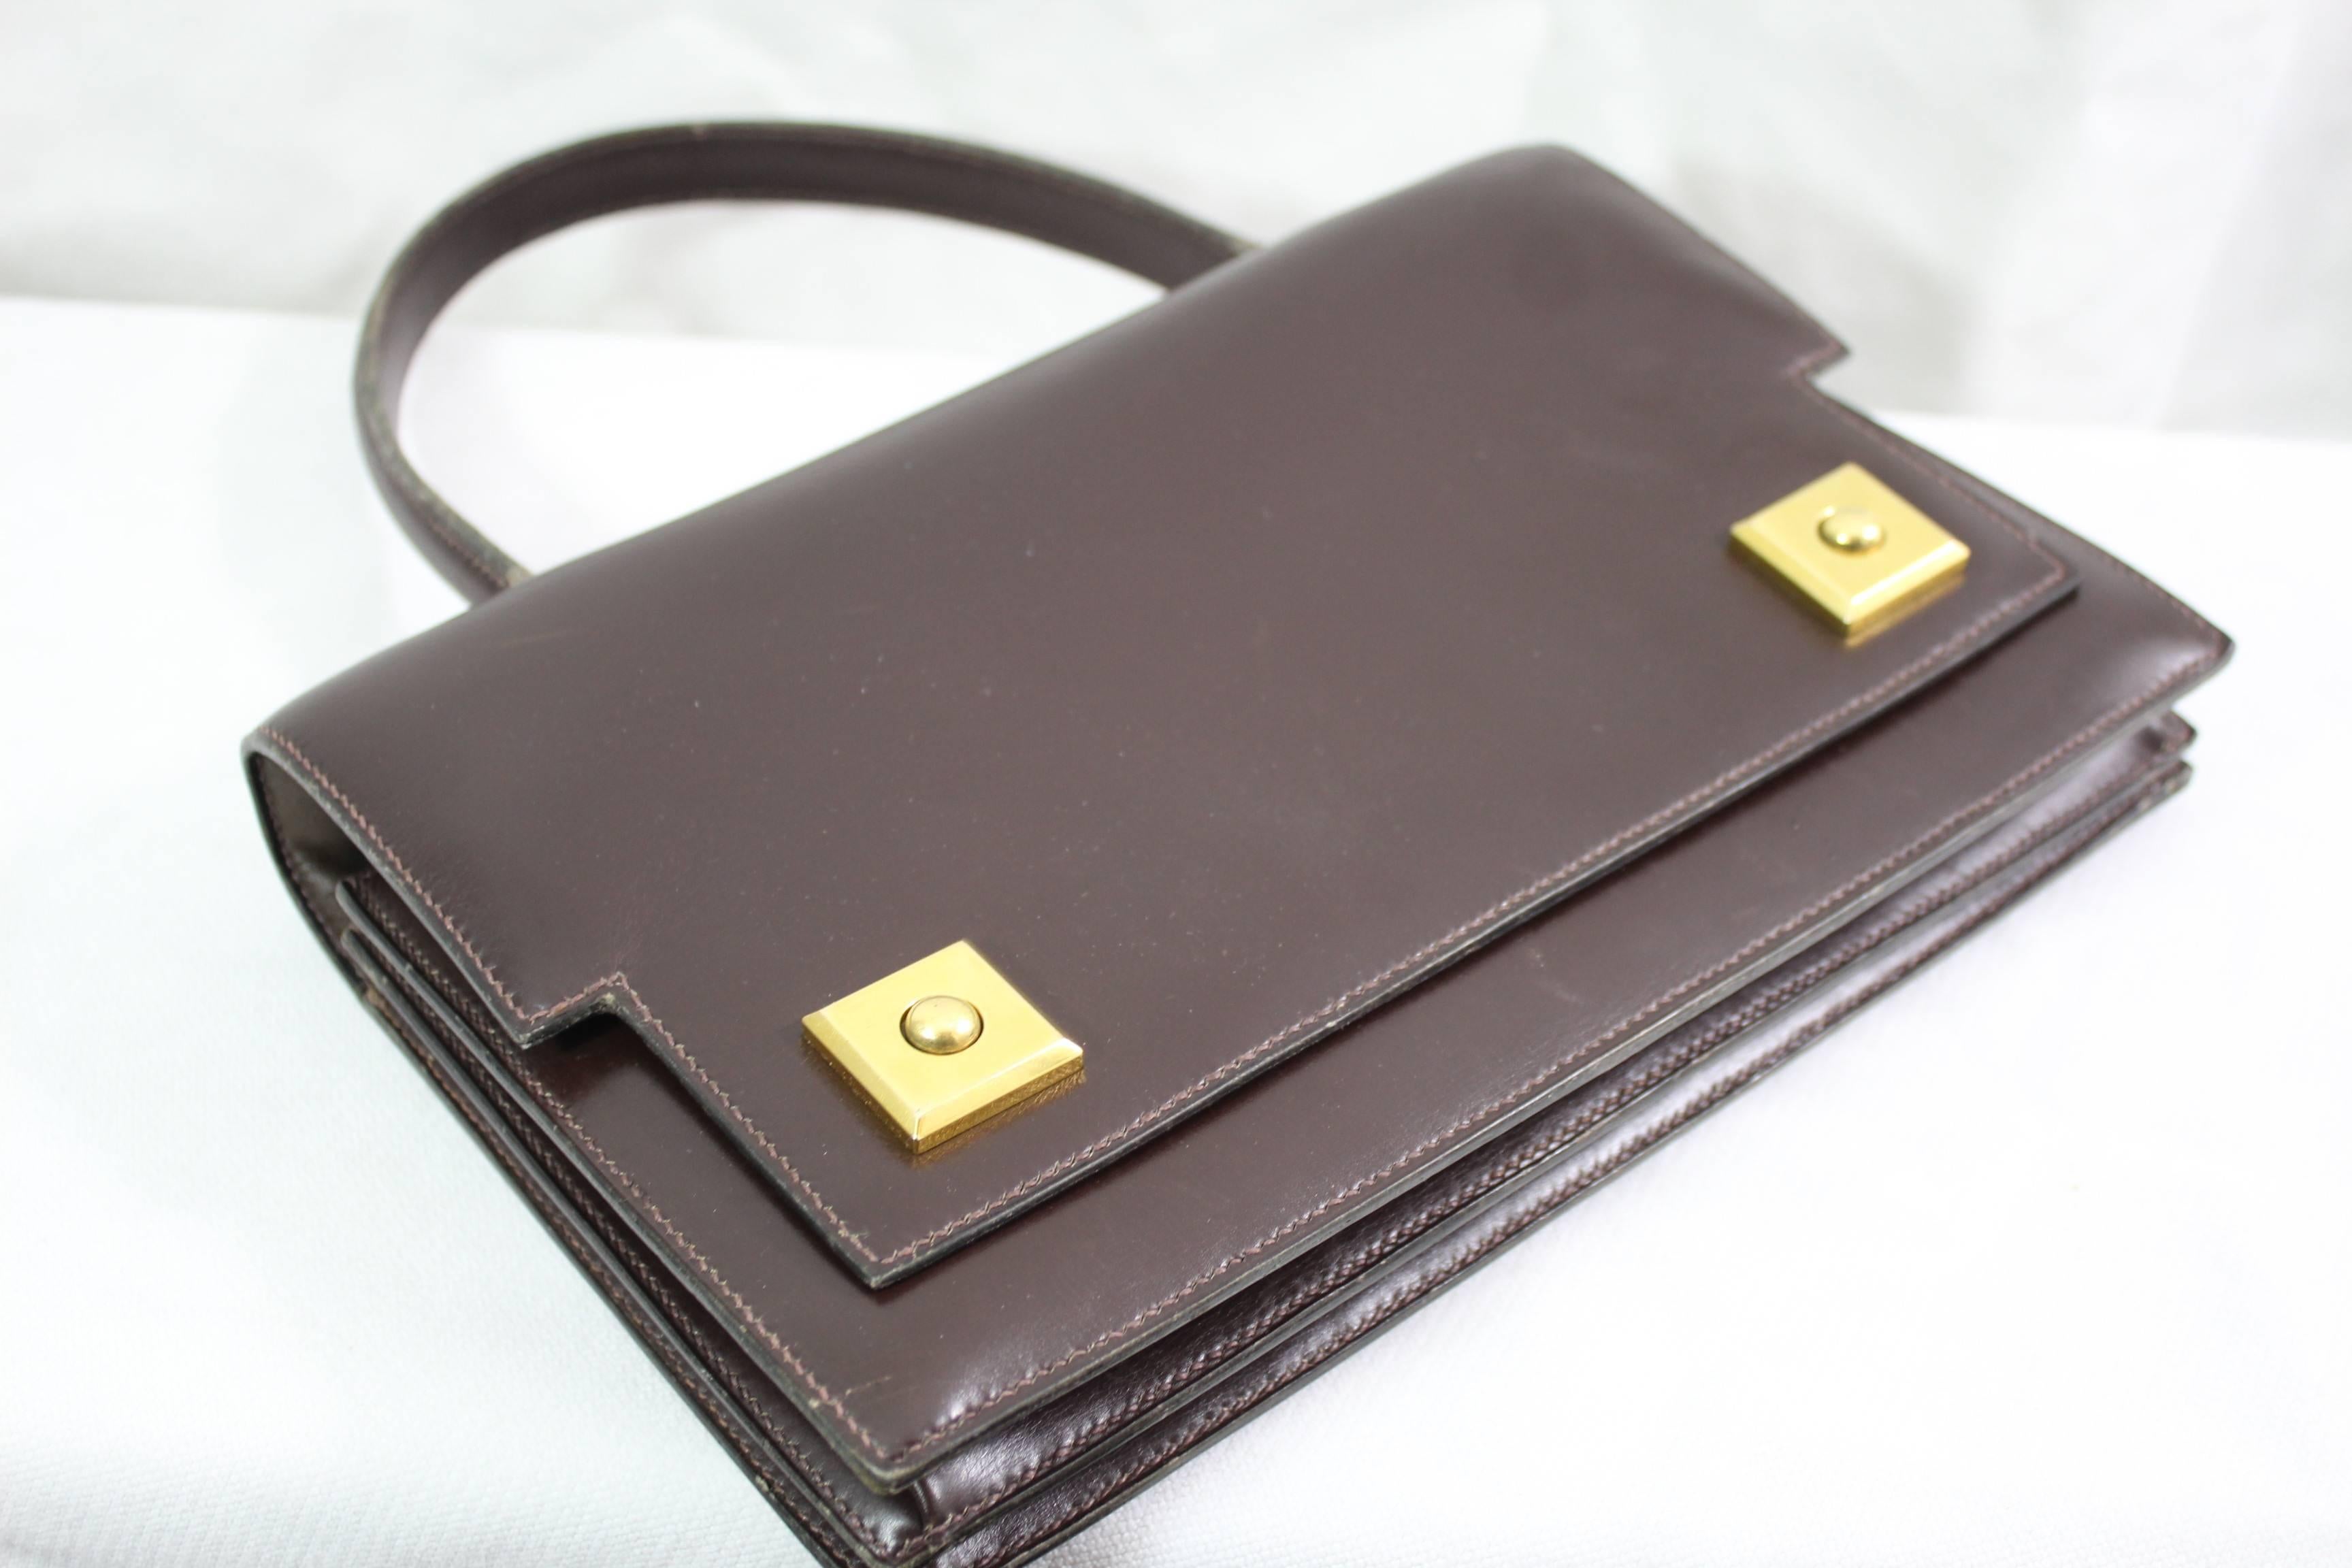 Nice Vintage Hemes Darrk brown bag in box leather.

goood condition for a bag with almost 50 years old.

Front and back leather in really good condition. Interior really clean.

Really light cracking on the handle

Size 25x17 cm